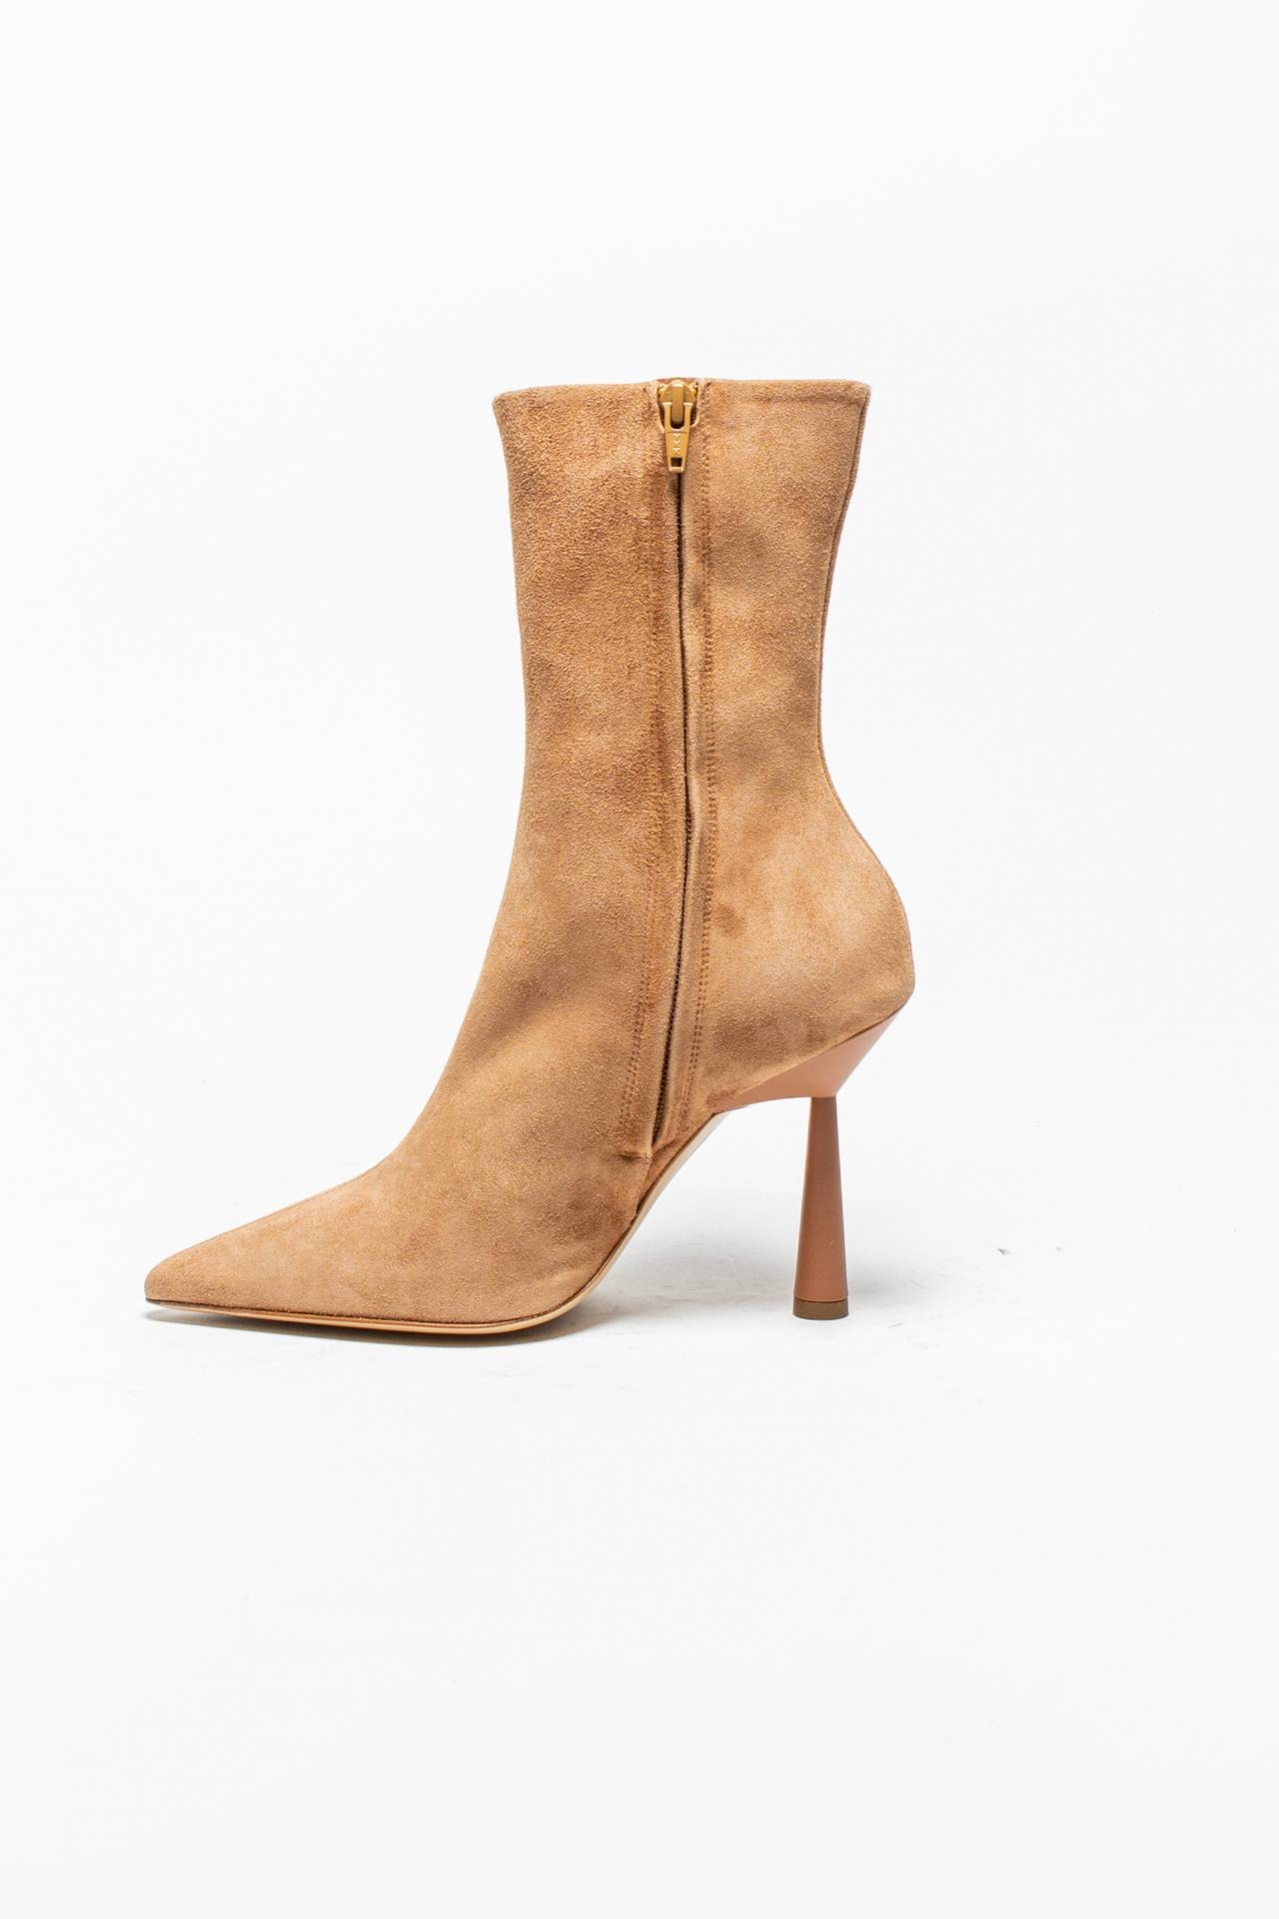 GIA/RHV ROSIE 7 ankle boots